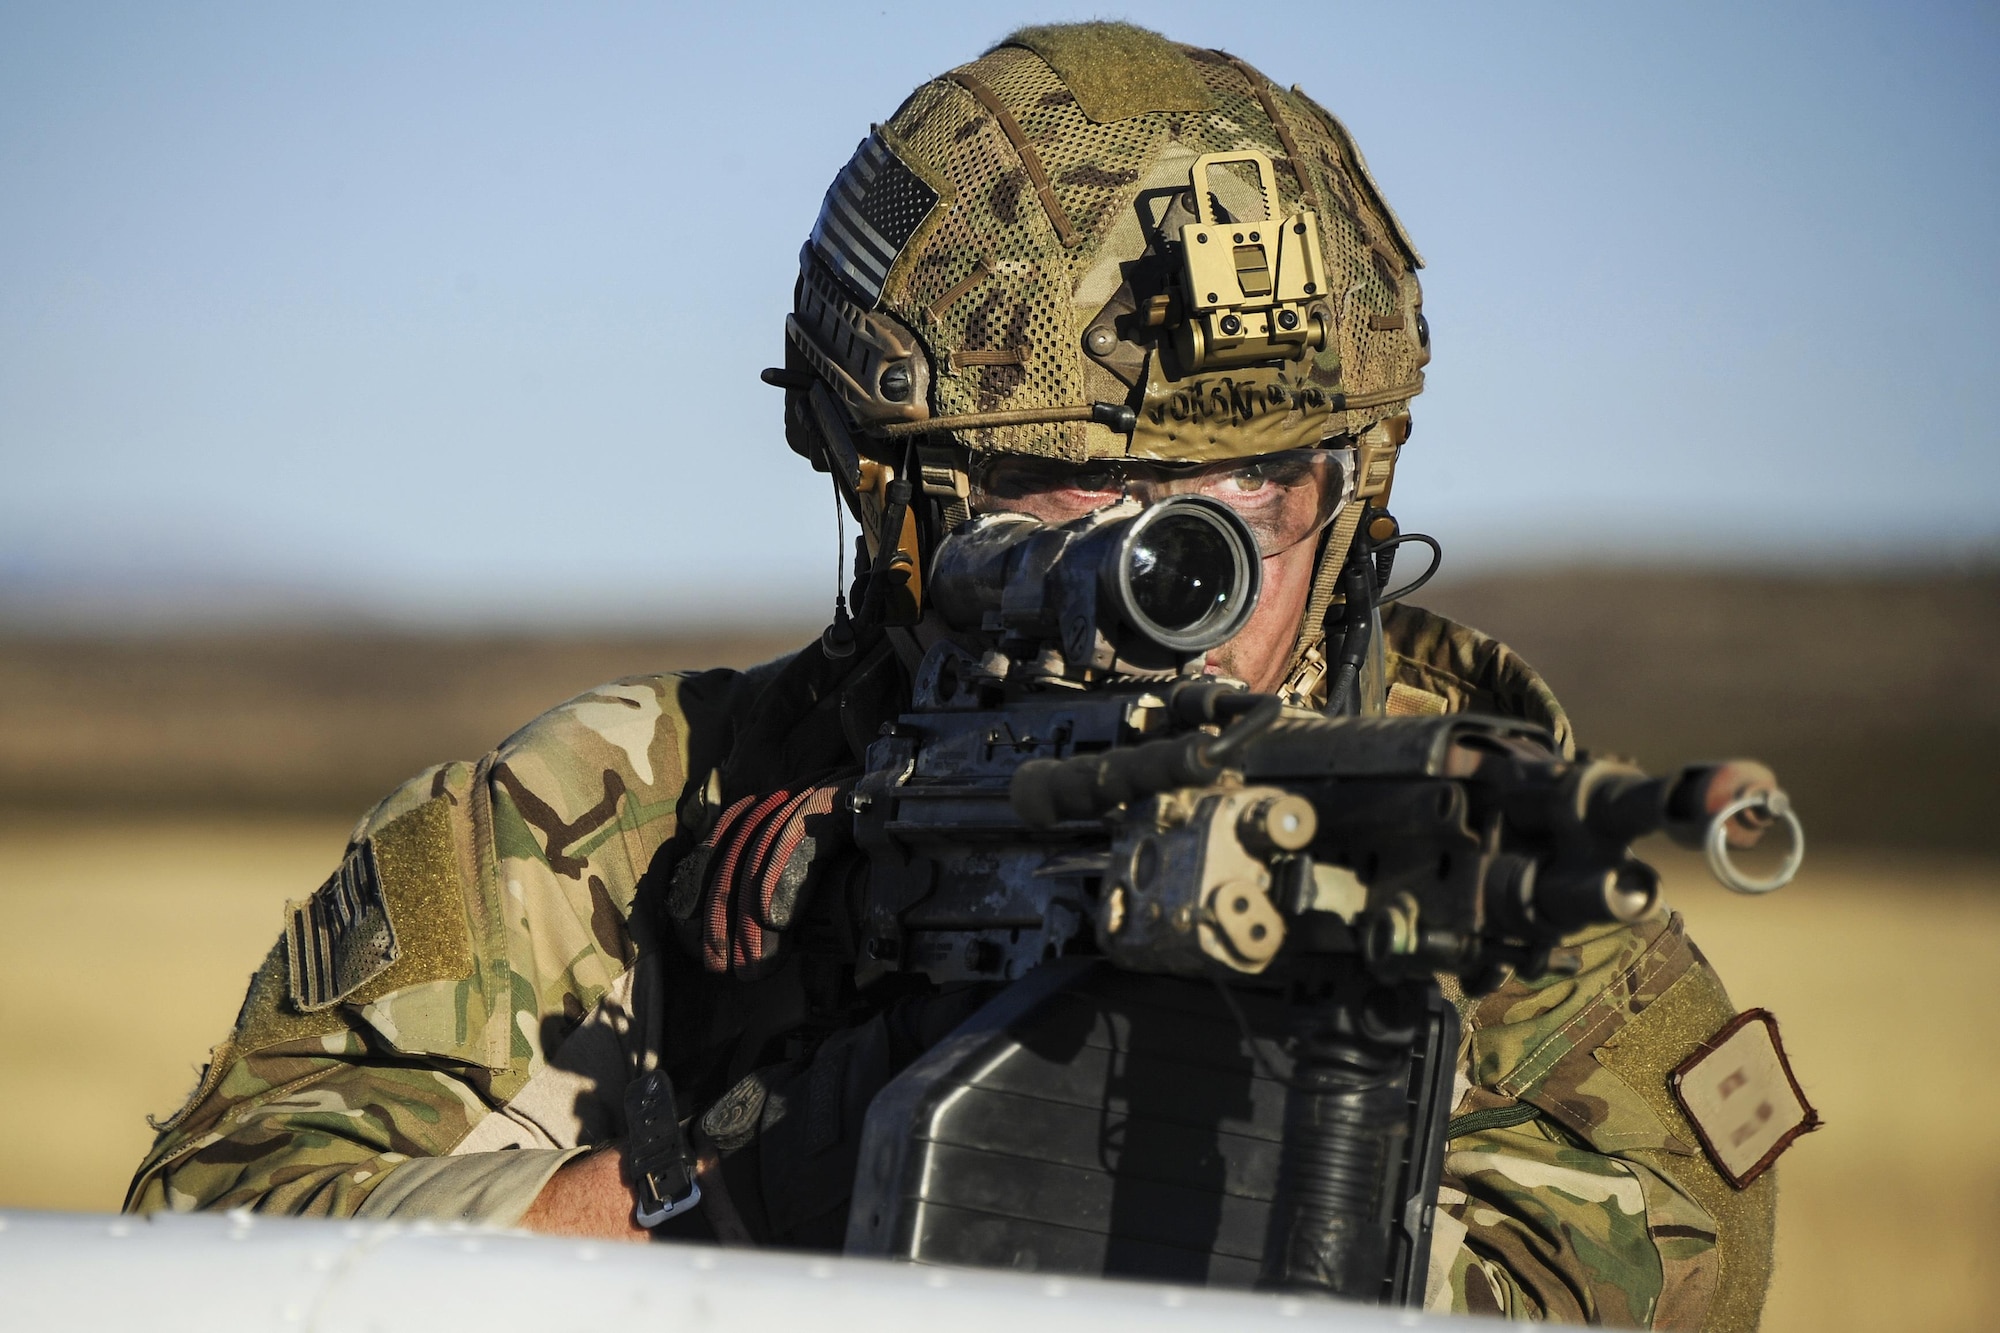 An airman scans his sector while providing security during a mass casualty exercise as part of Razor’s Edge 2016 at Fort Huachuca, Ariz., Dec. 8, 2016. Air Force photo by Airman 1st Class Mya M. Crosby